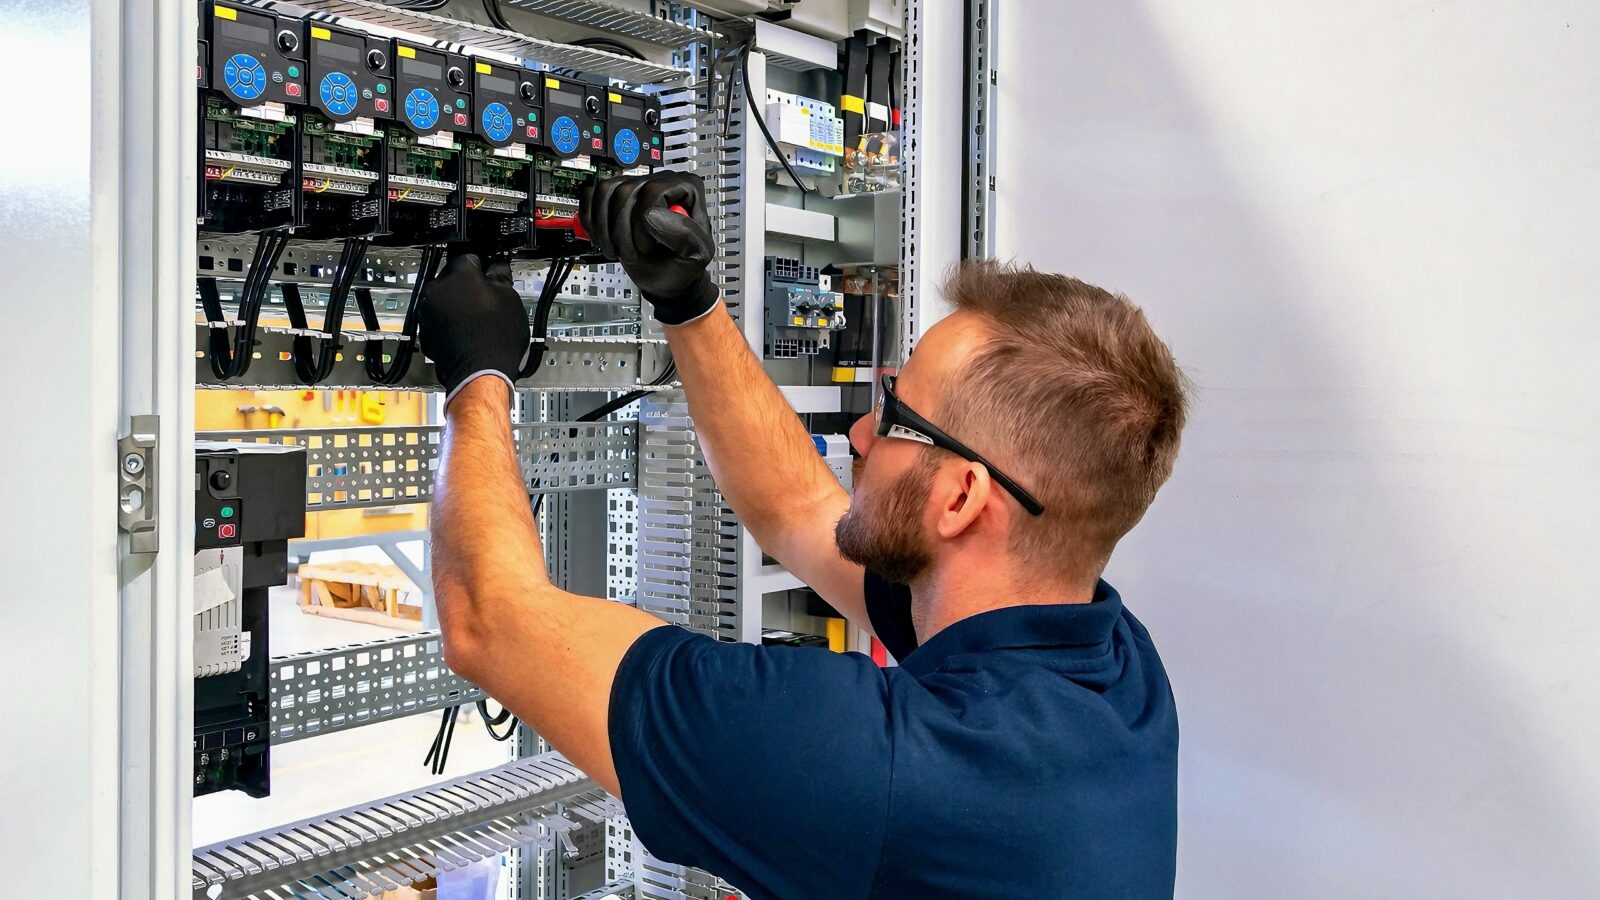 Electrician working on electric panel